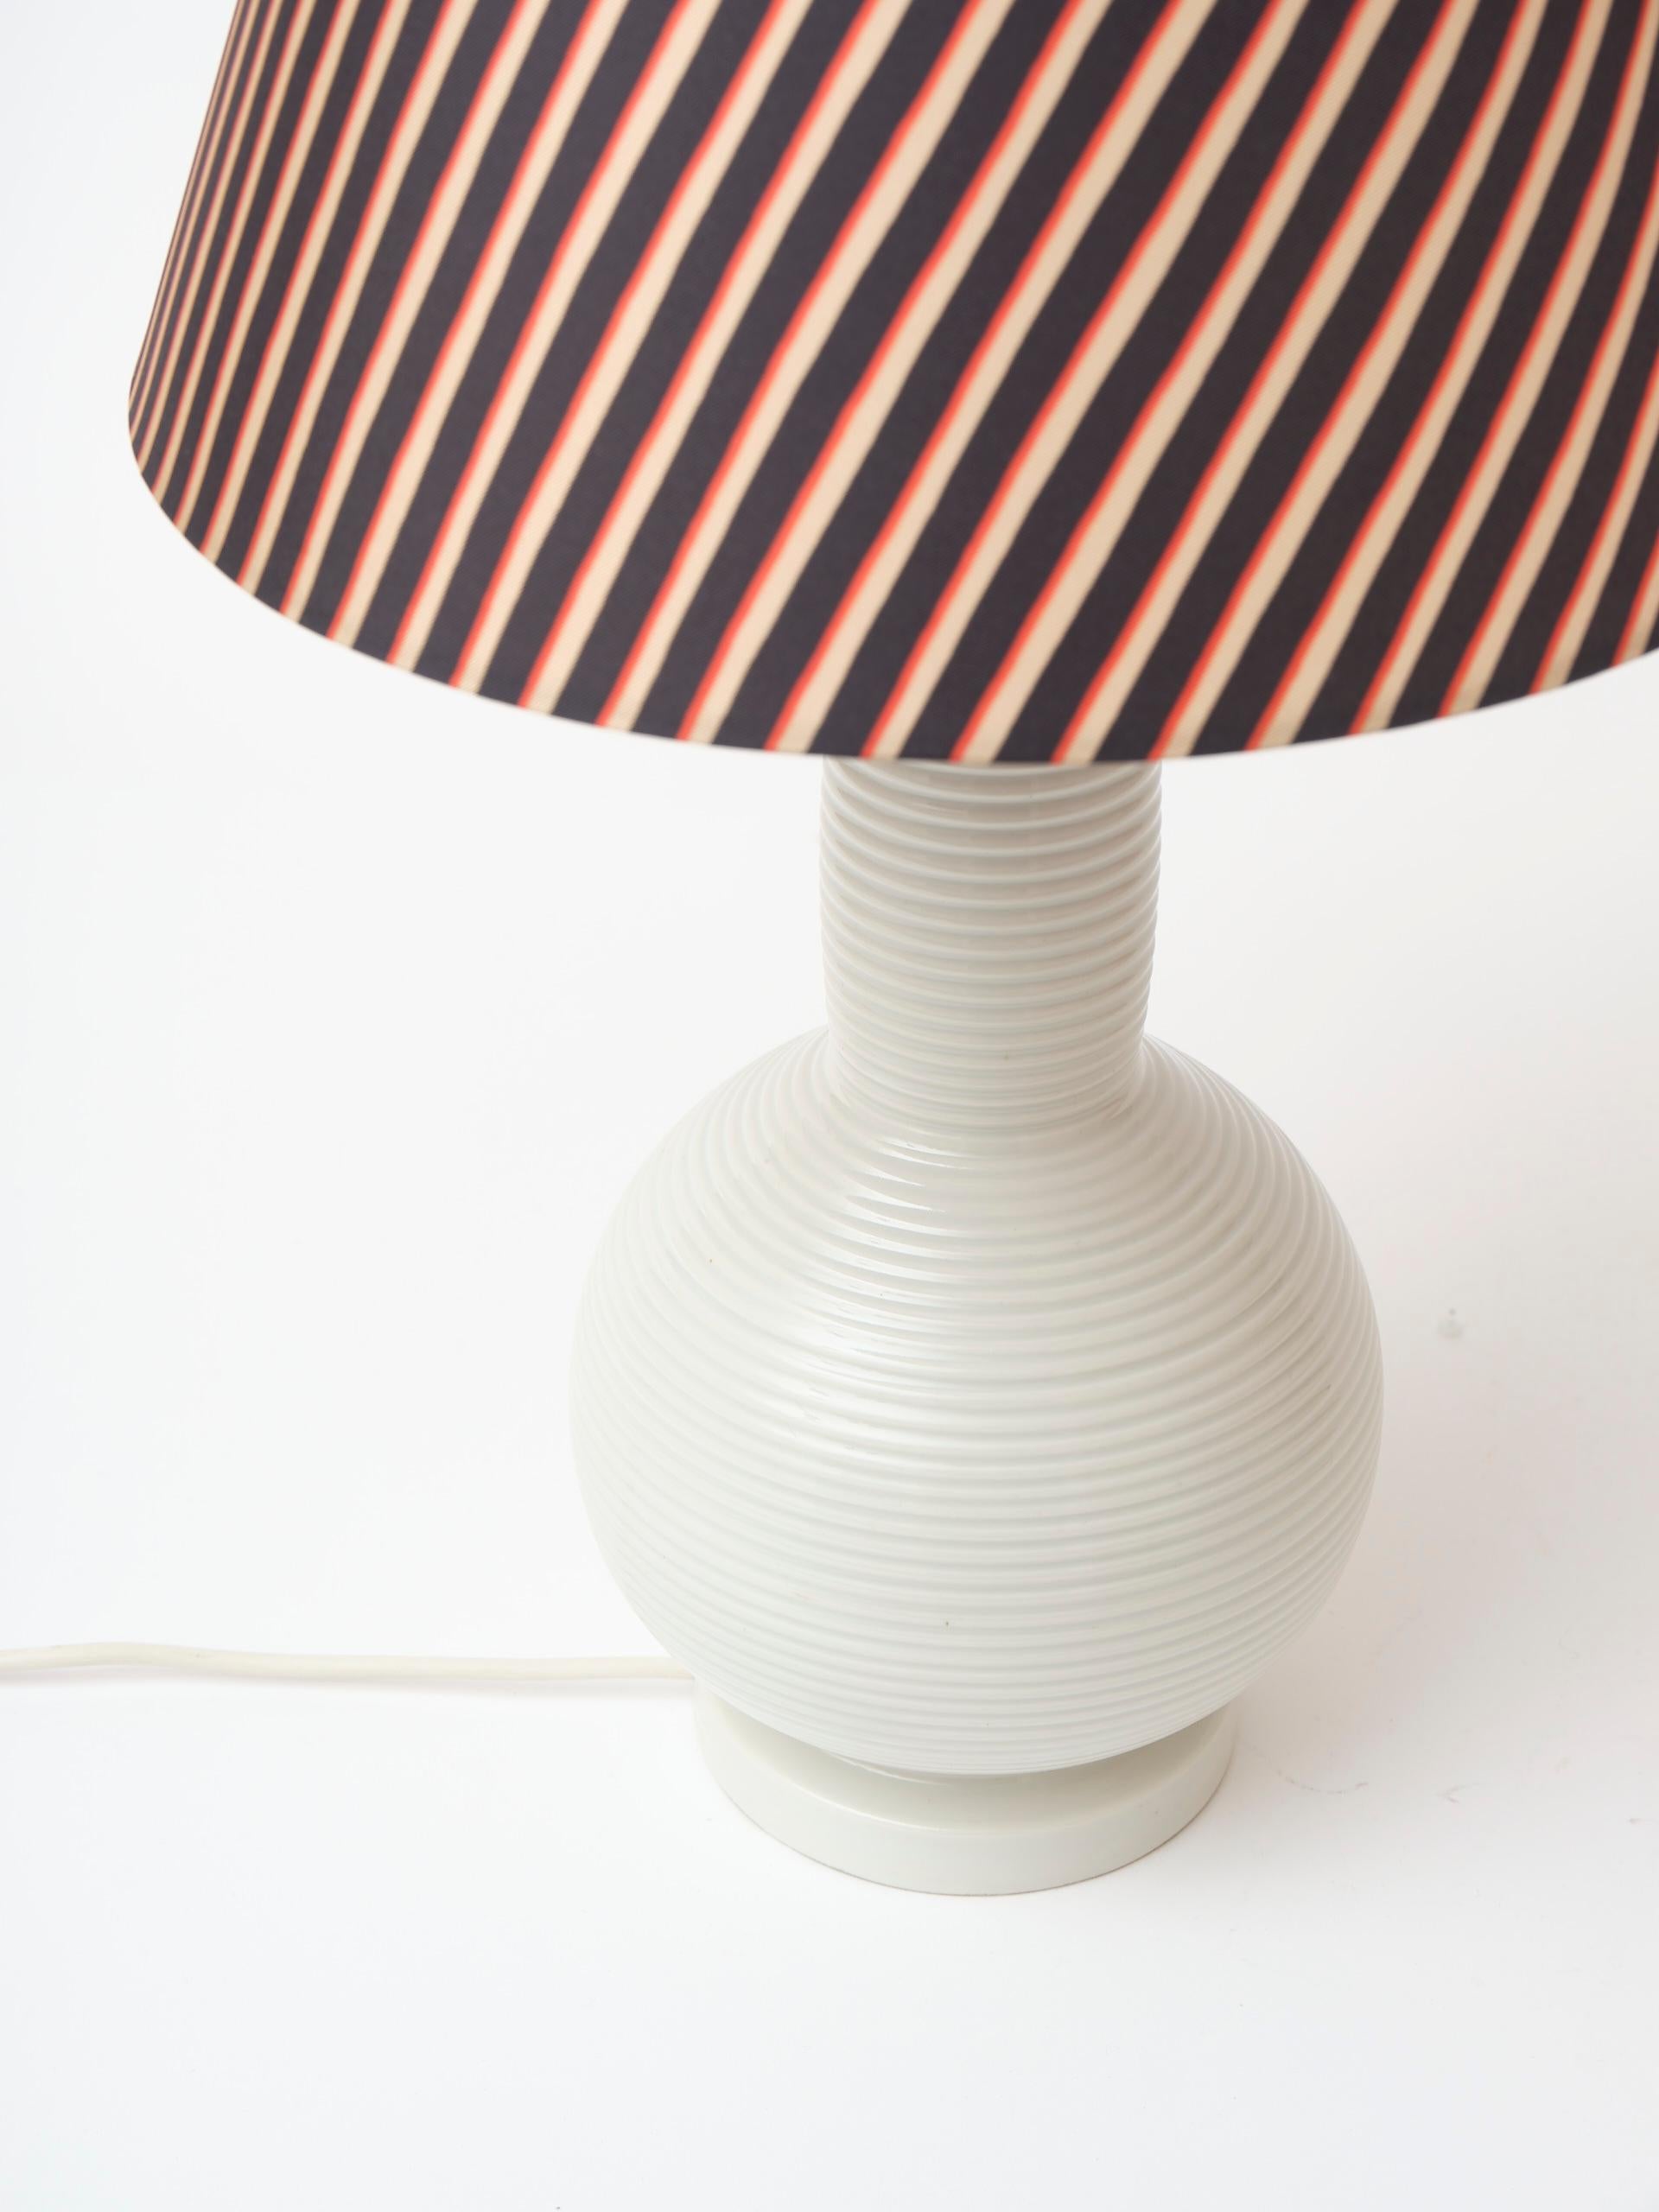 Heavy Danish midcentury table lamp in white rifled porcelain In Good Condition For Sale In Frederiksberg C, DK